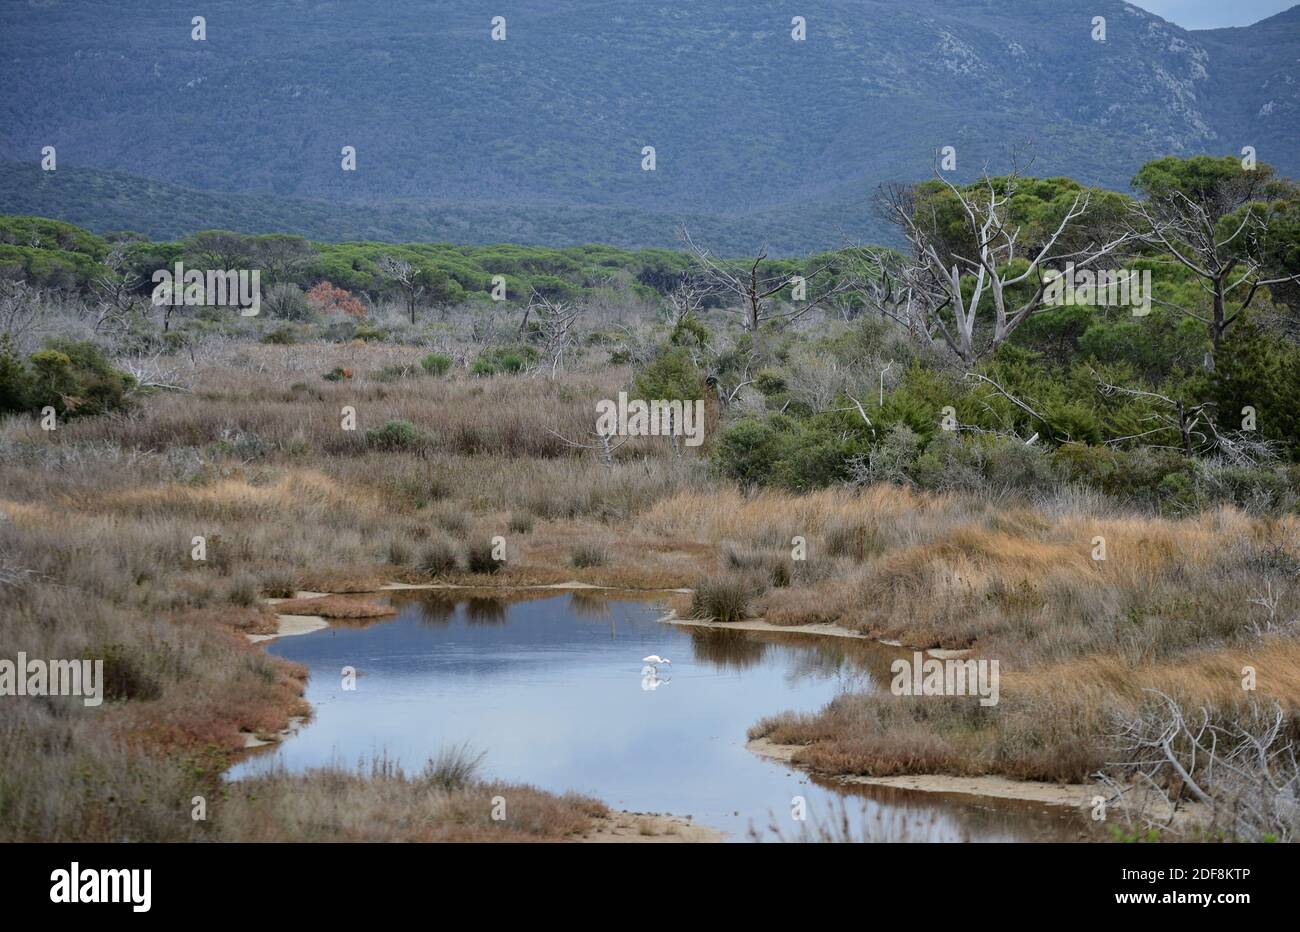 a glimpse of the wild and unspoiled vegetation of the land of the Uccellina park. On a small pond an egret is hunting for prey Stock Photo